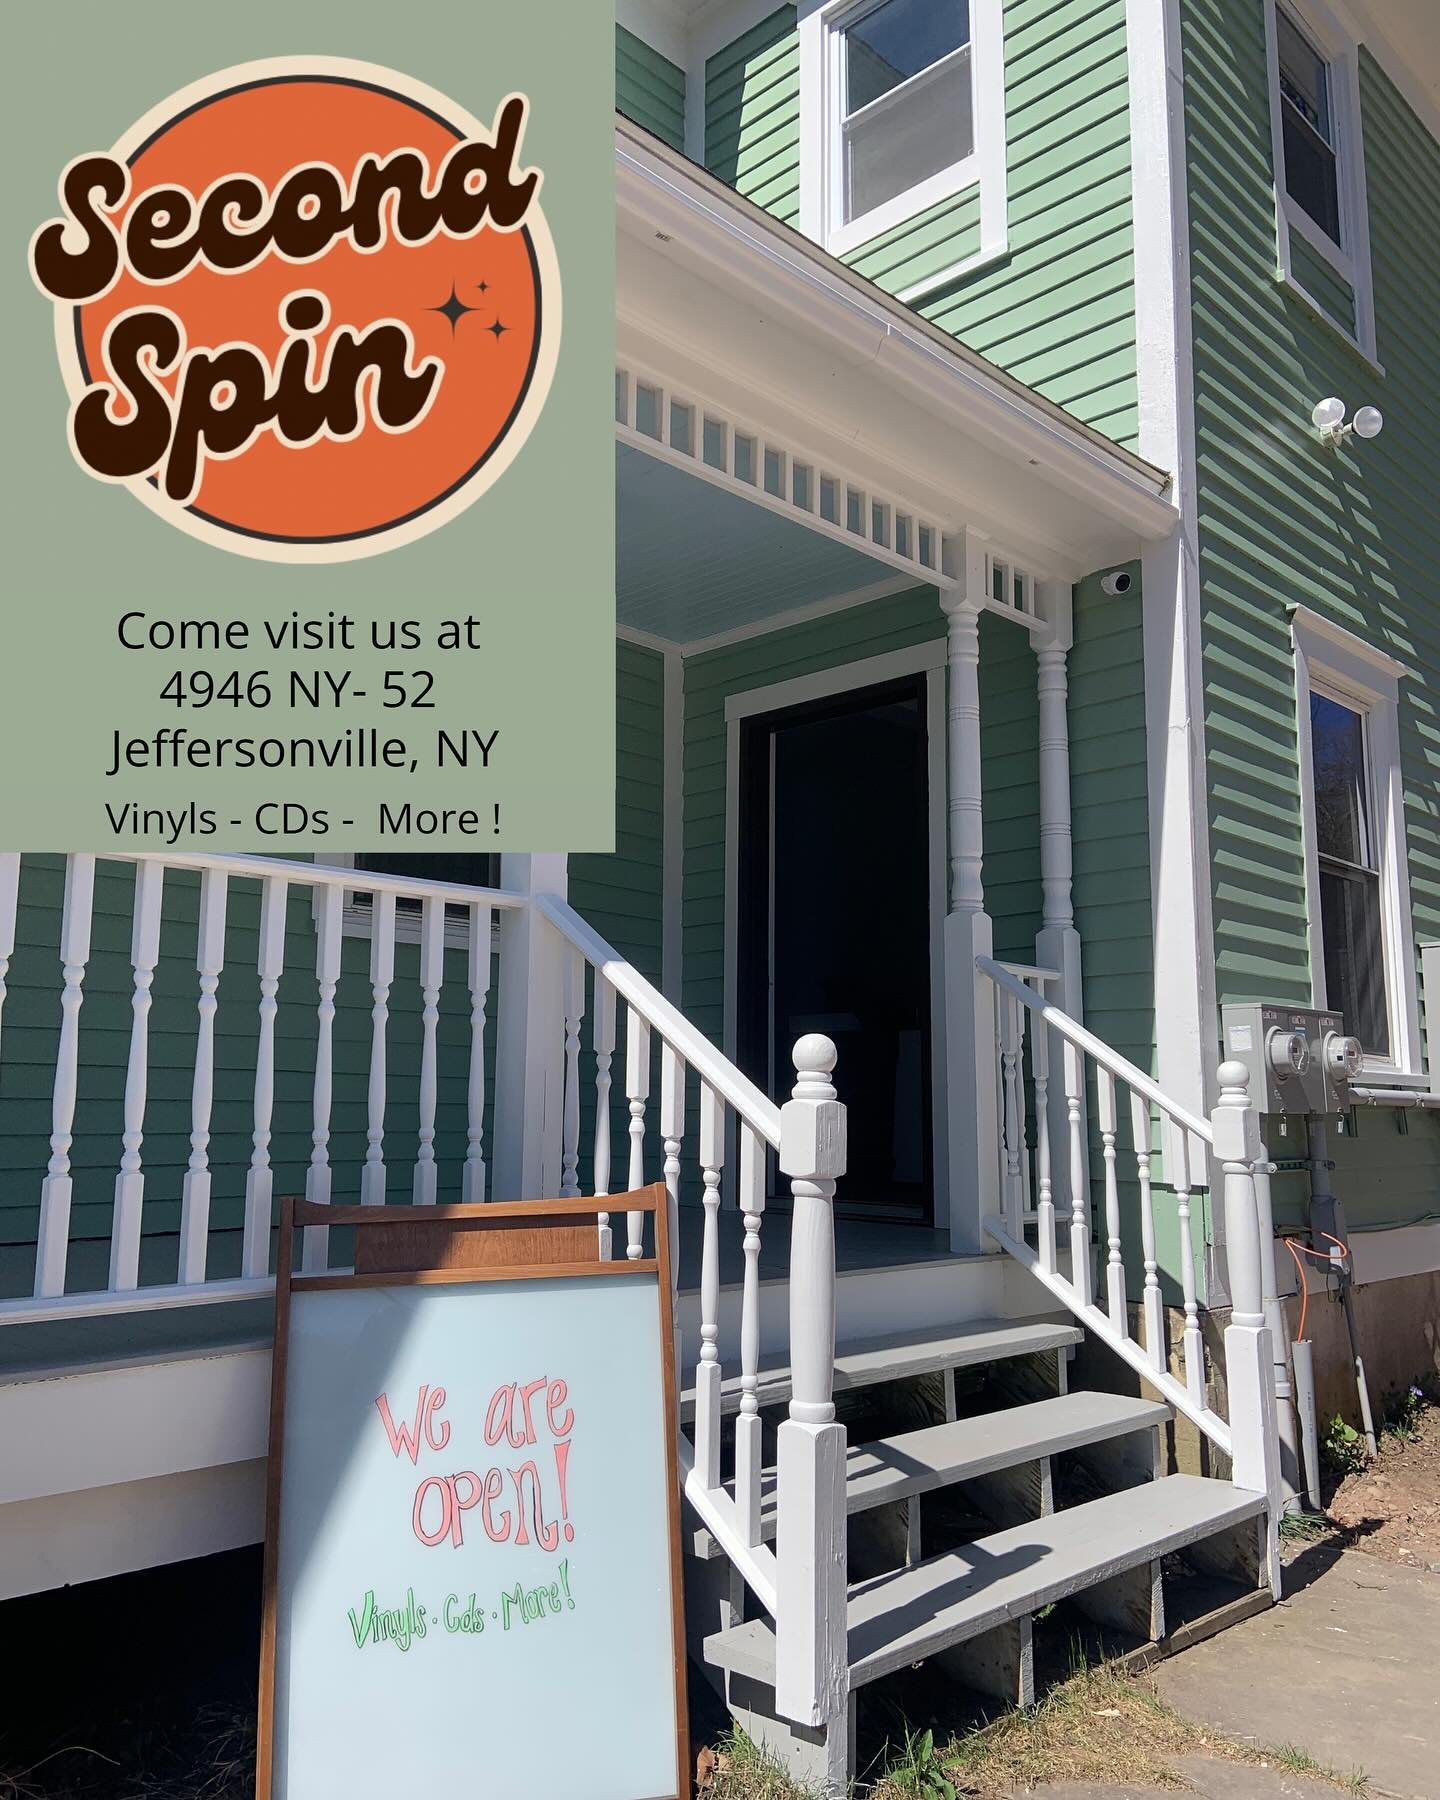 For our music lovers out there, we have opened a new store; Second Spin! Come check out our vinyls, cds and moree !! 4946 NY-52 Jeffersonville, NY